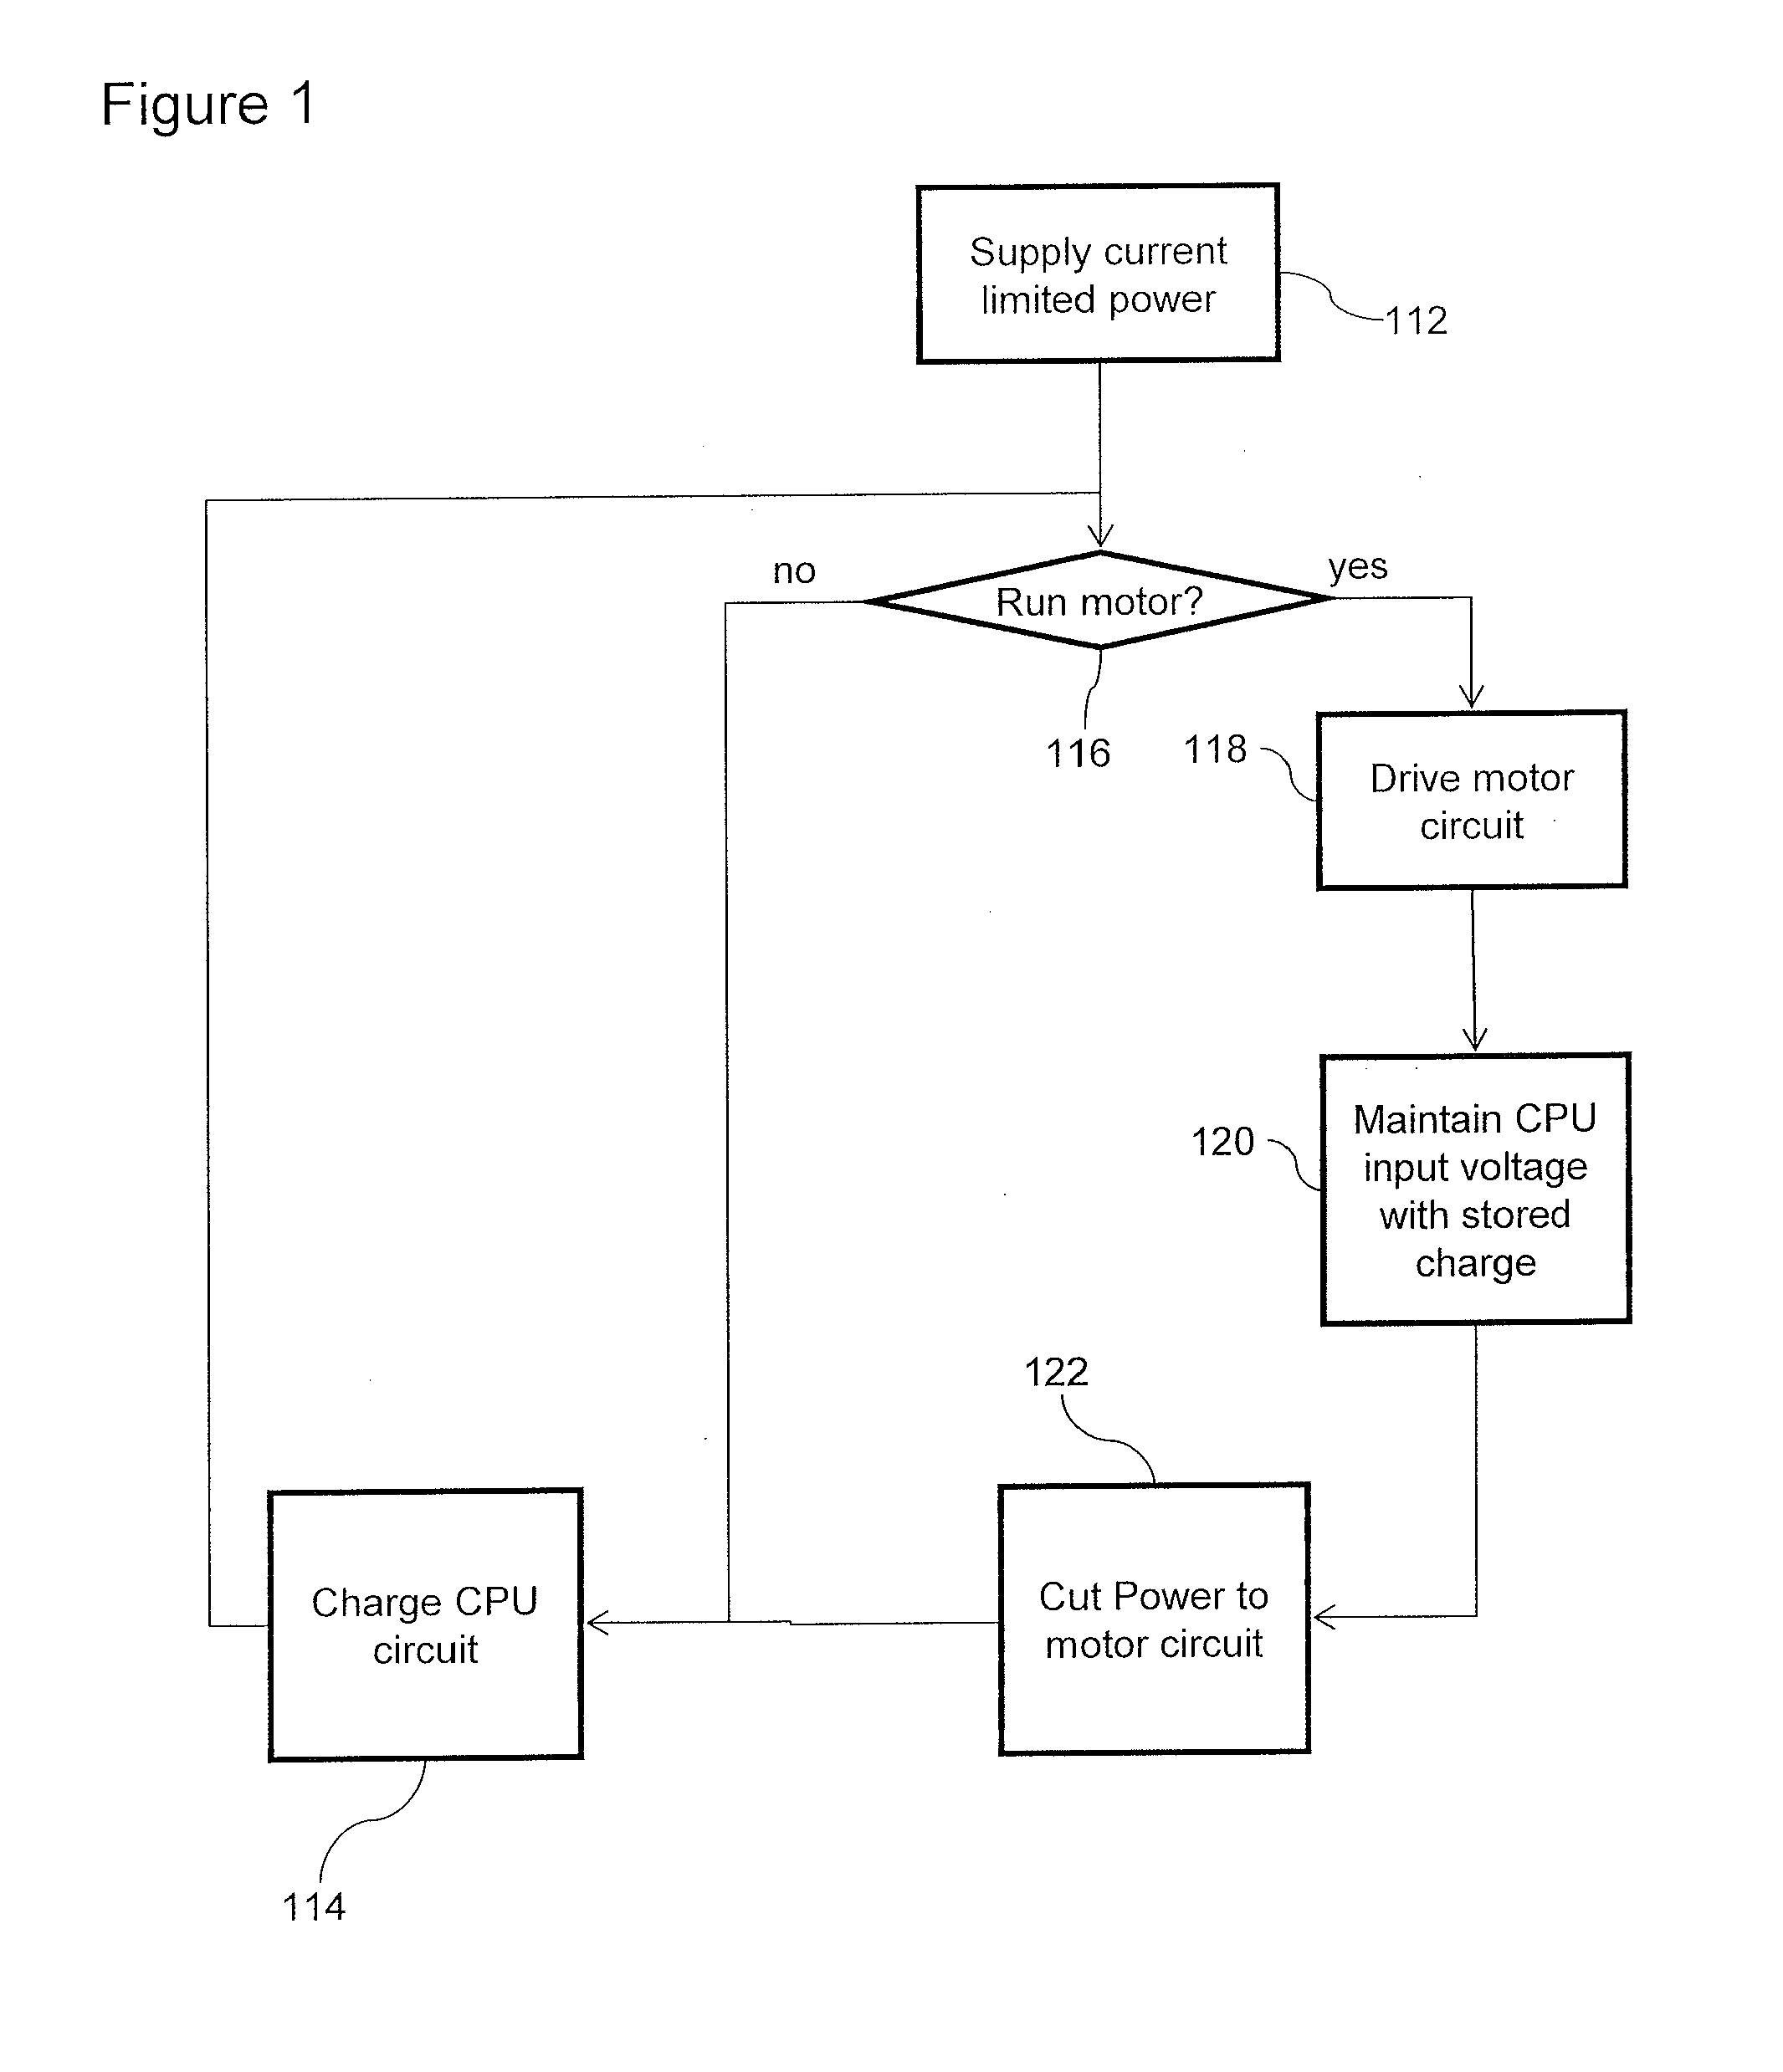 System and method to distribute power to both an inertial device and a voltage sensitive device from a single current limited power source